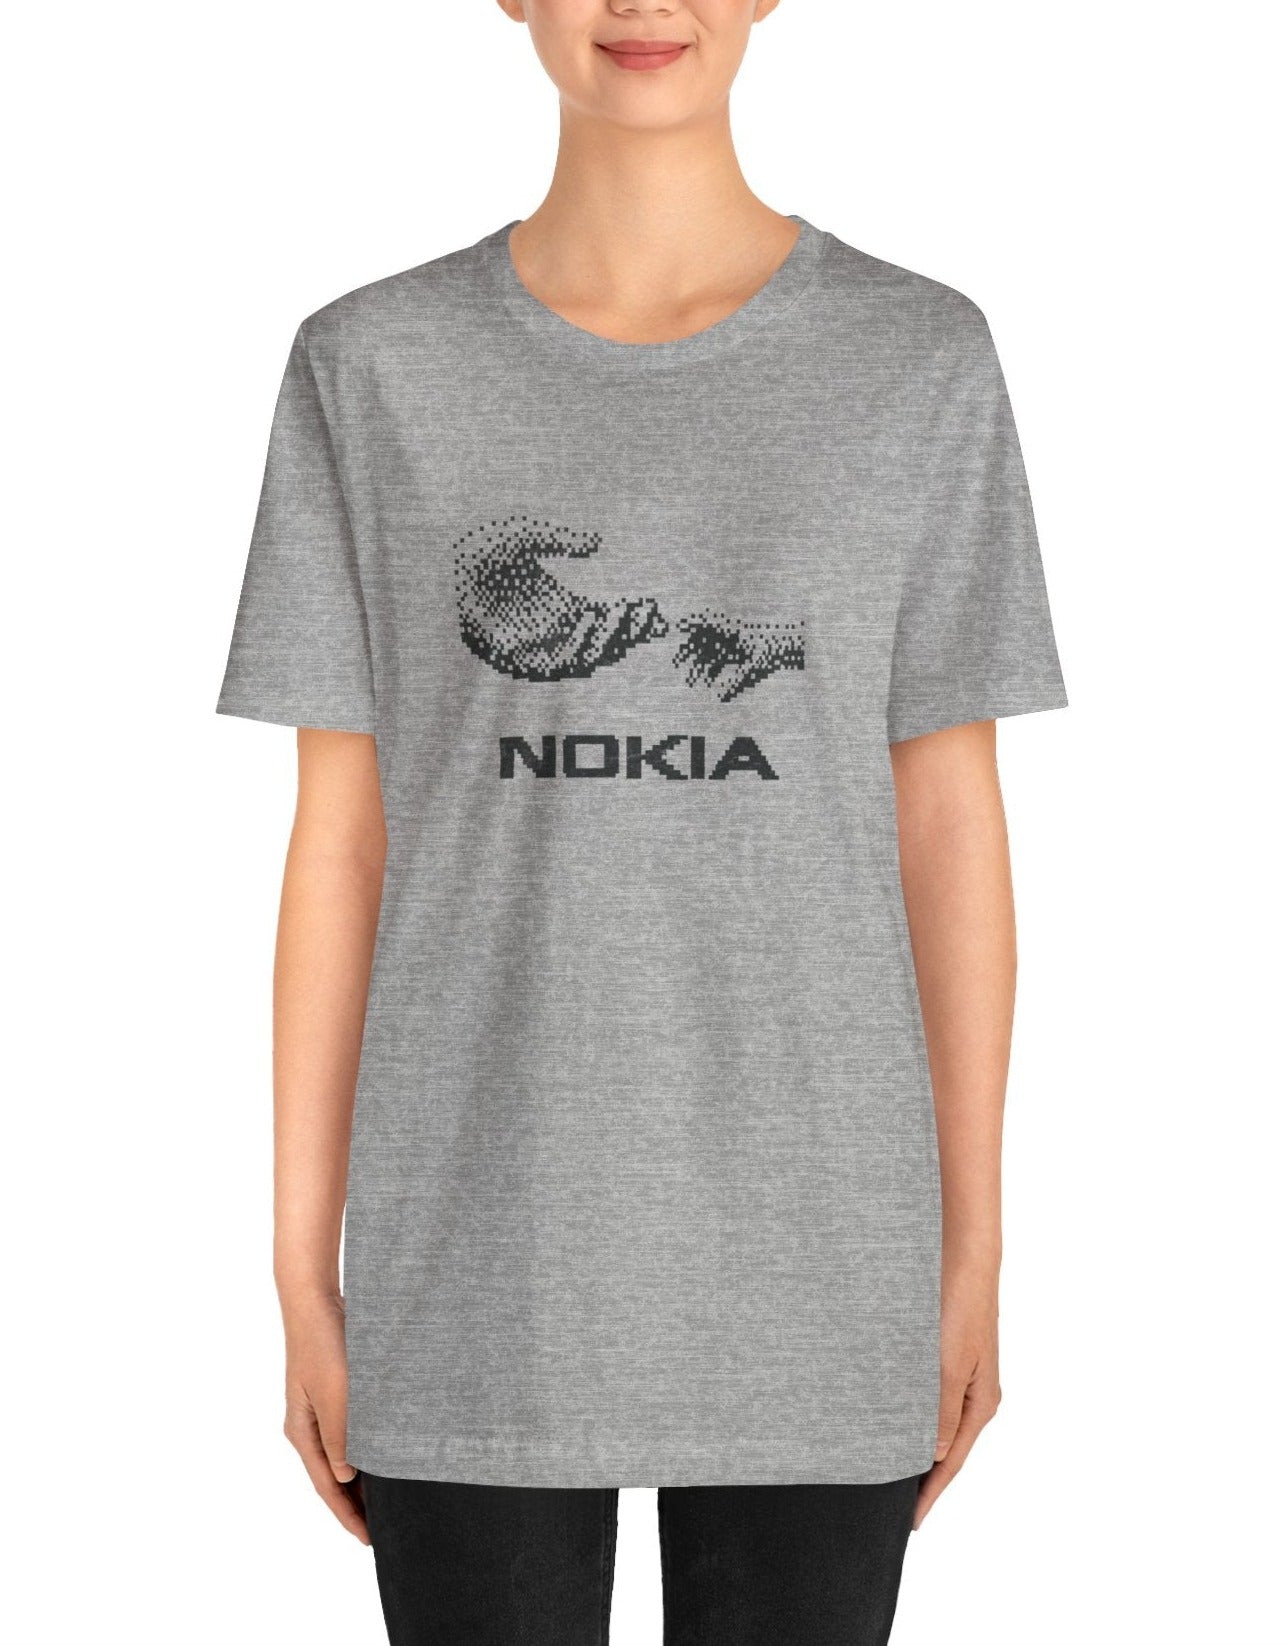 Nokia connecting peoples T-Shirt